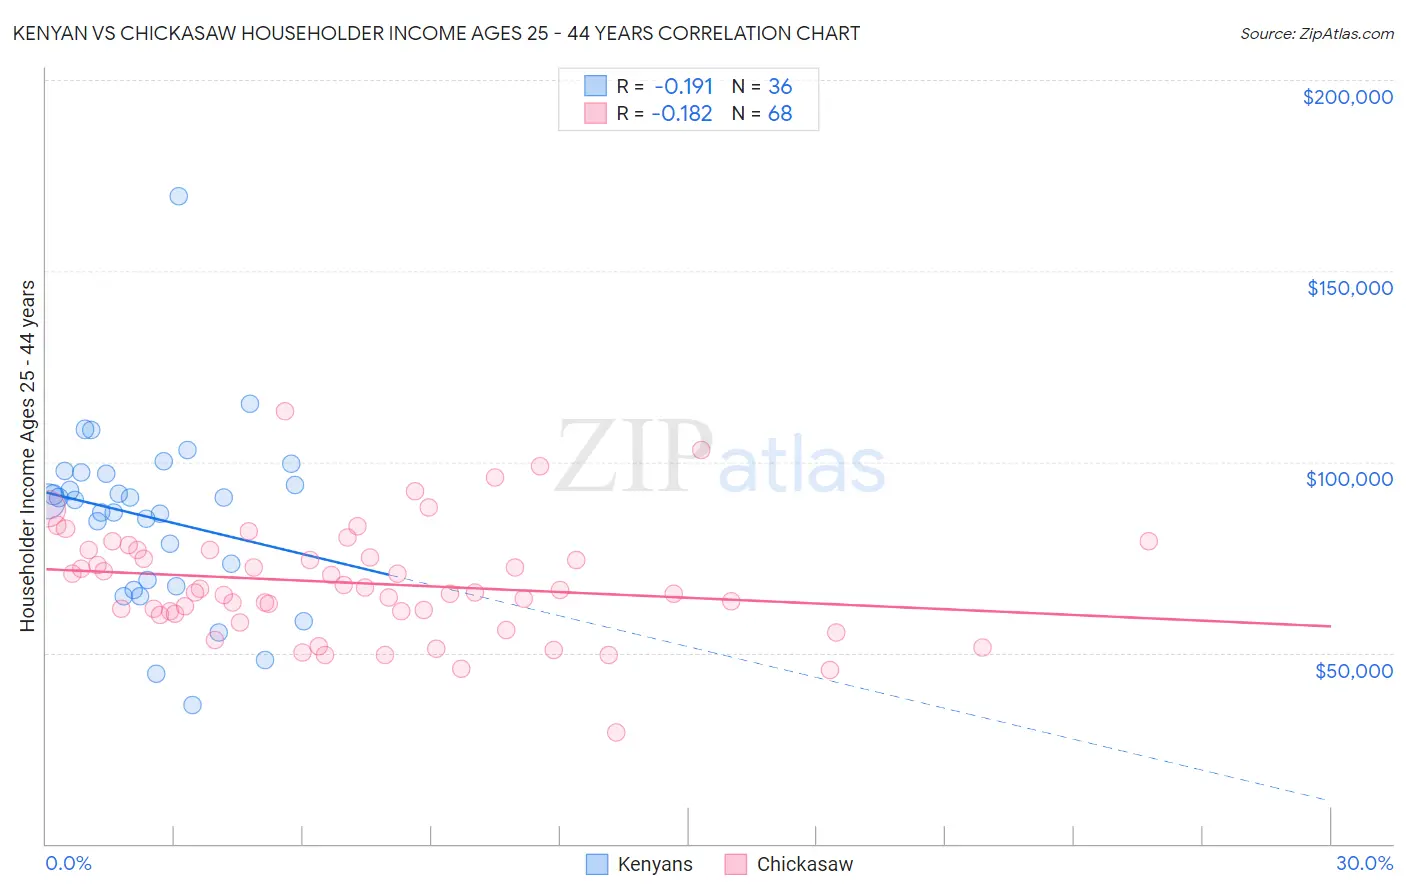 Kenyan vs Chickasaw Householder Income Ages 25 - 44 years